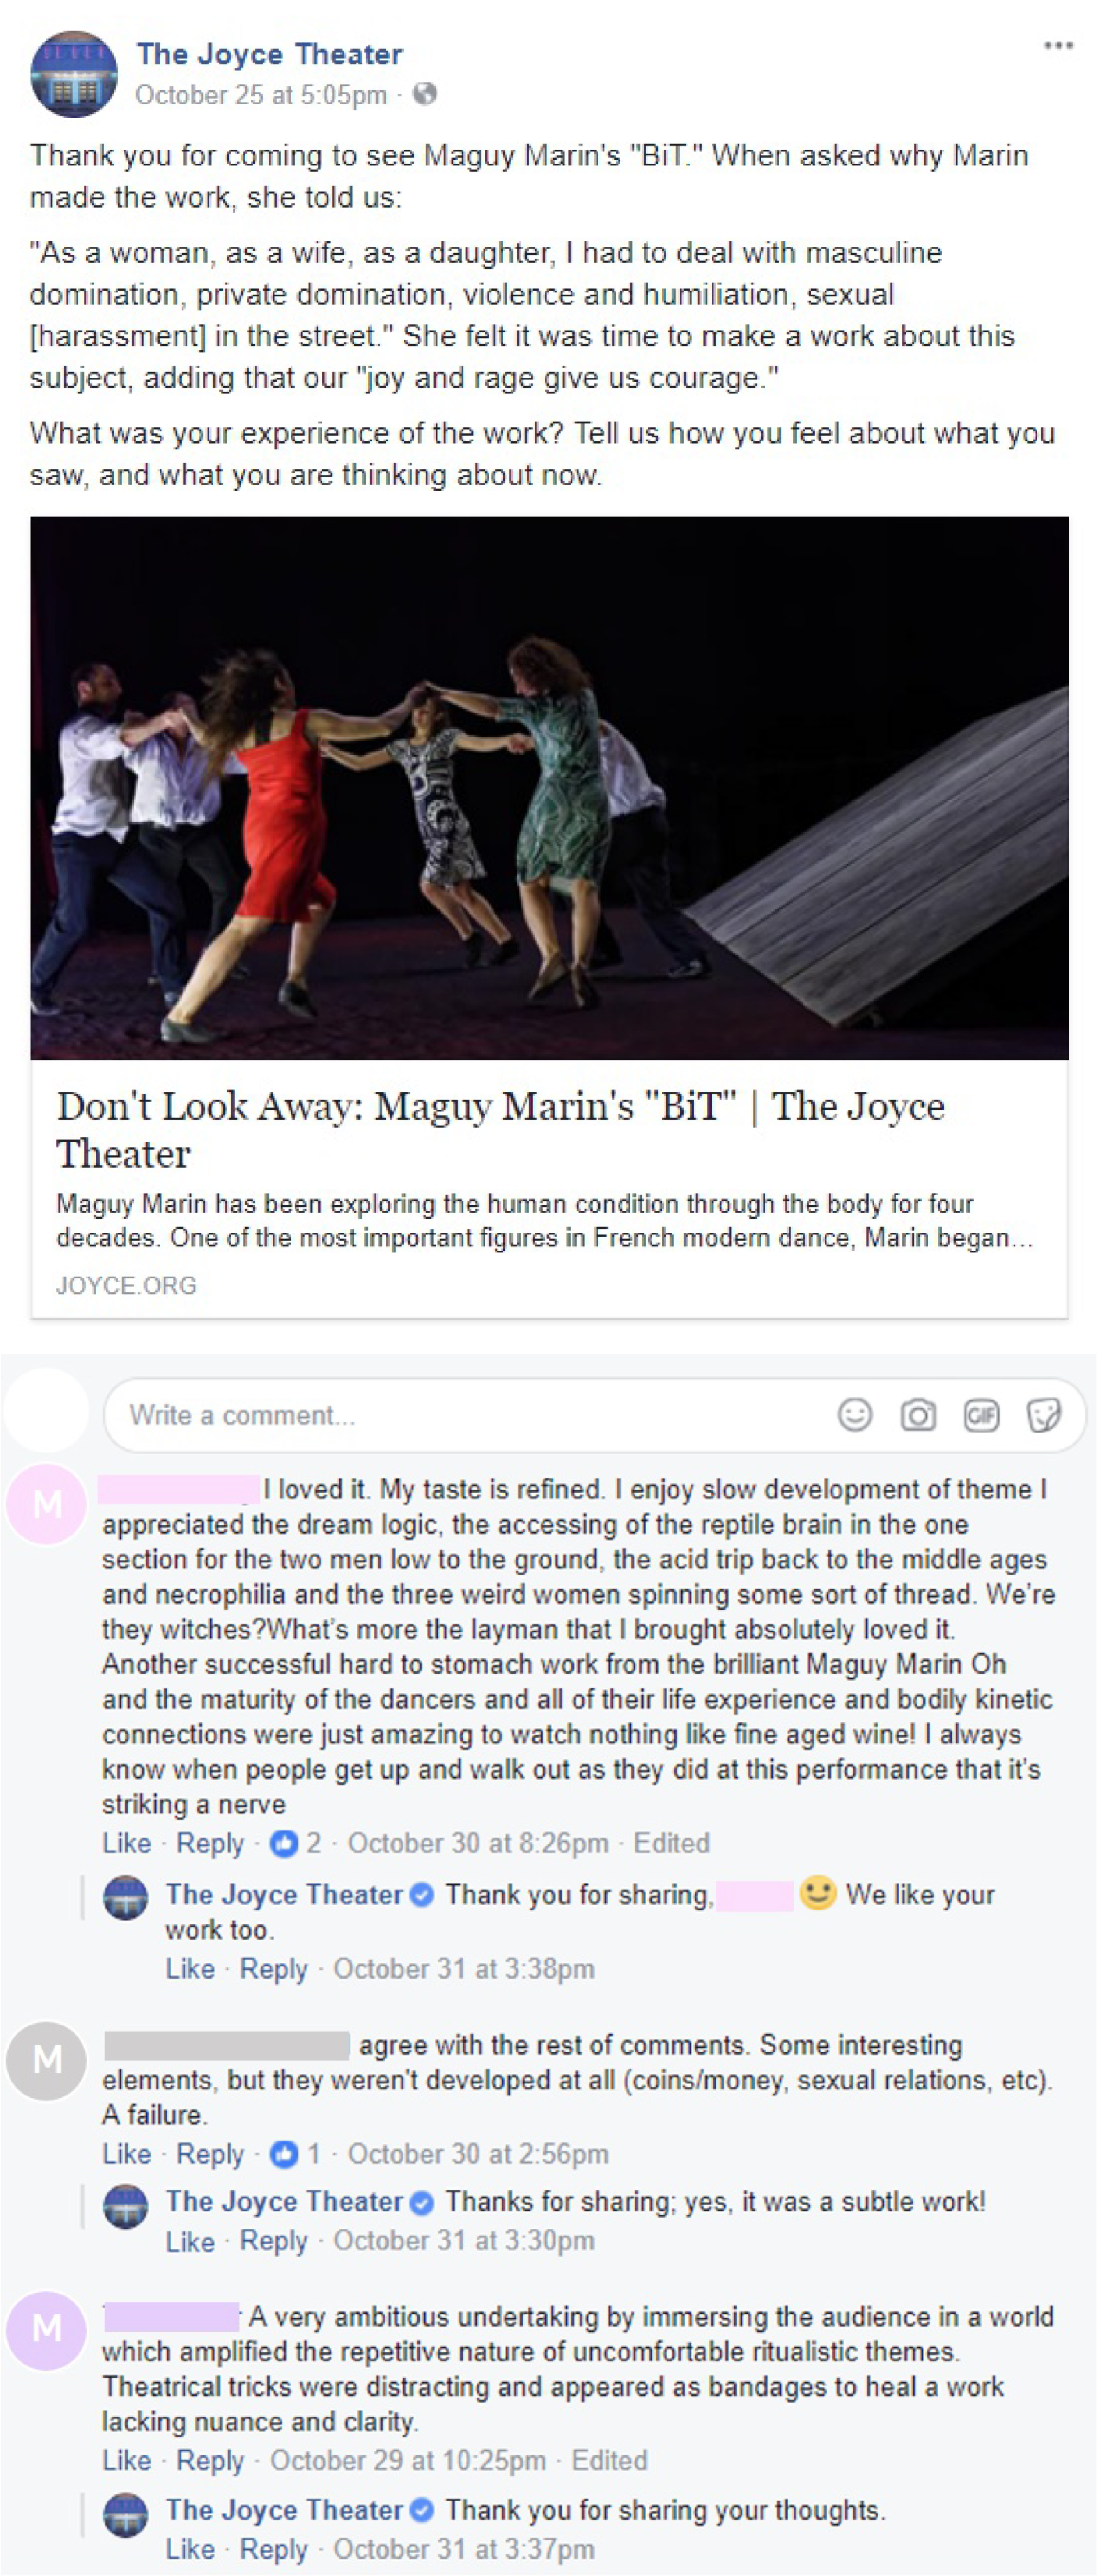 The Joyce Theater's post with comments served to Male Identifying Patrons